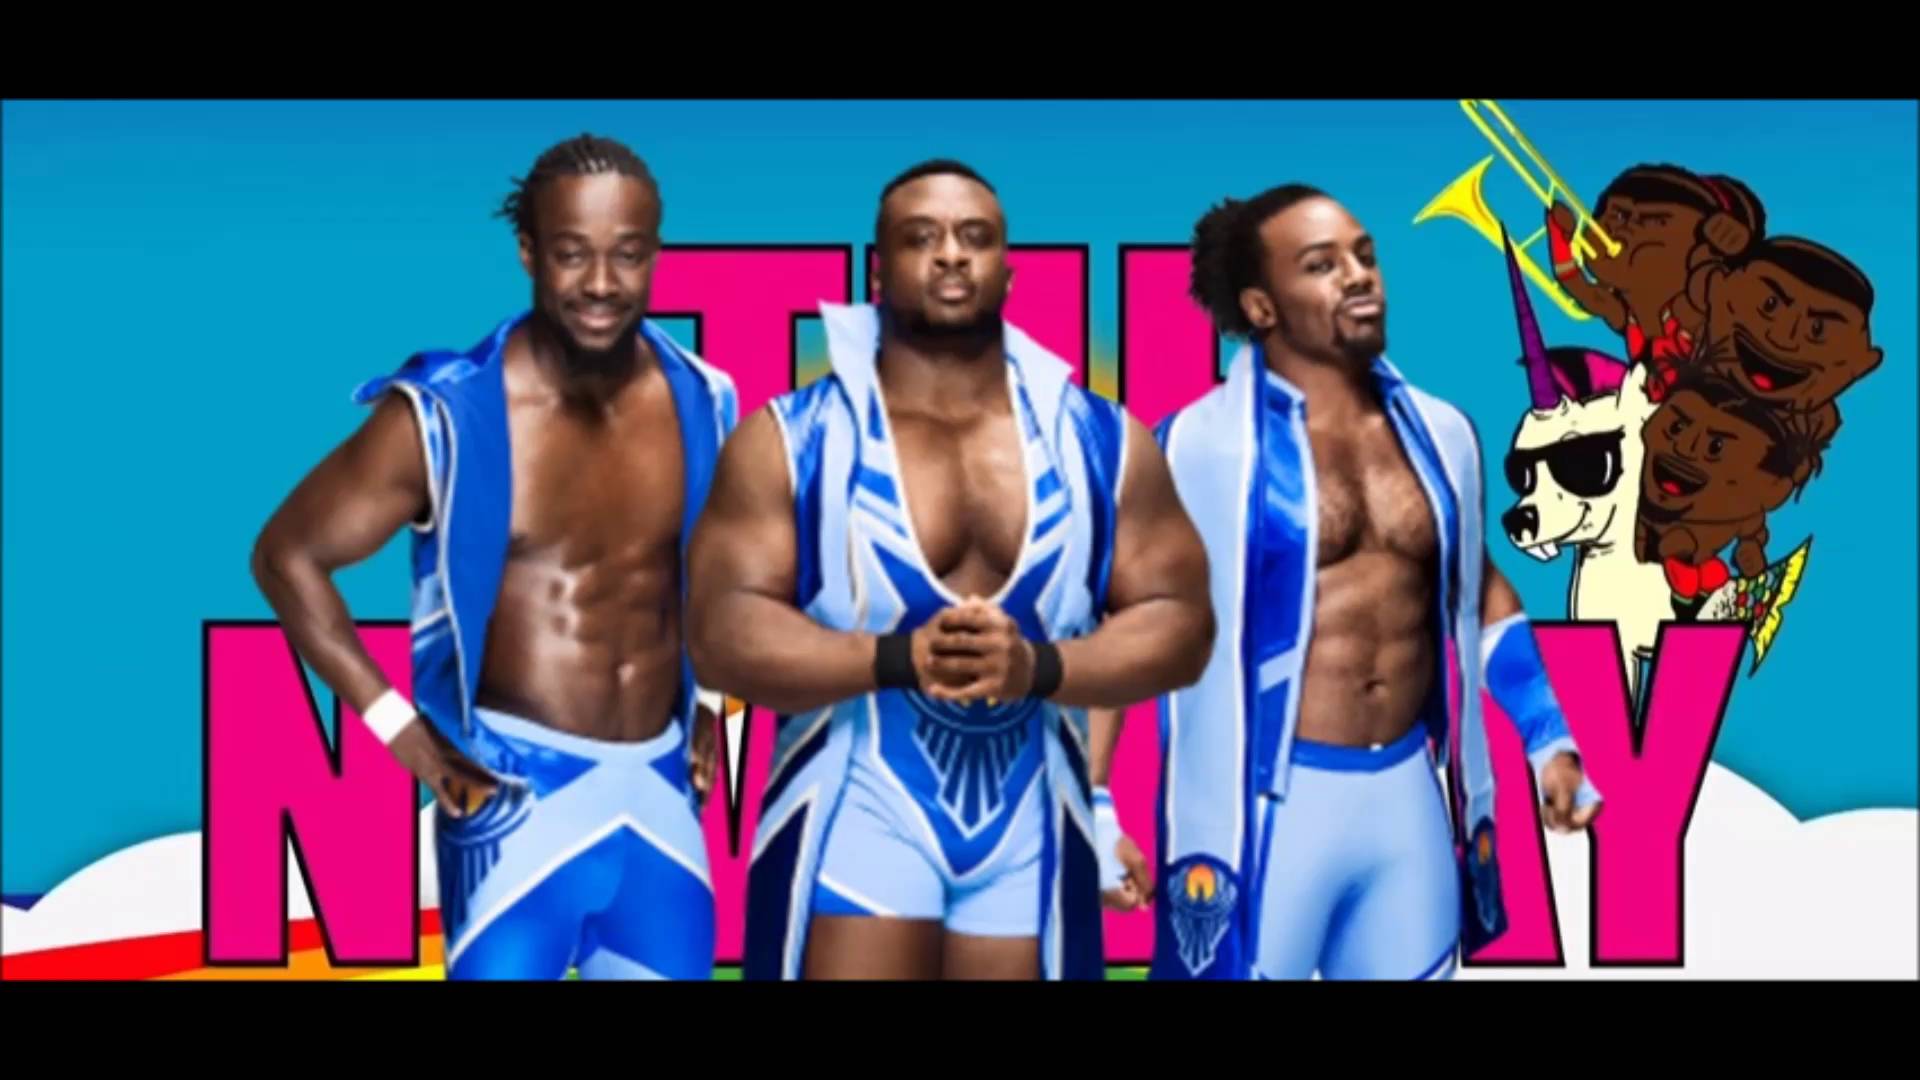 The New Day Wallpapers